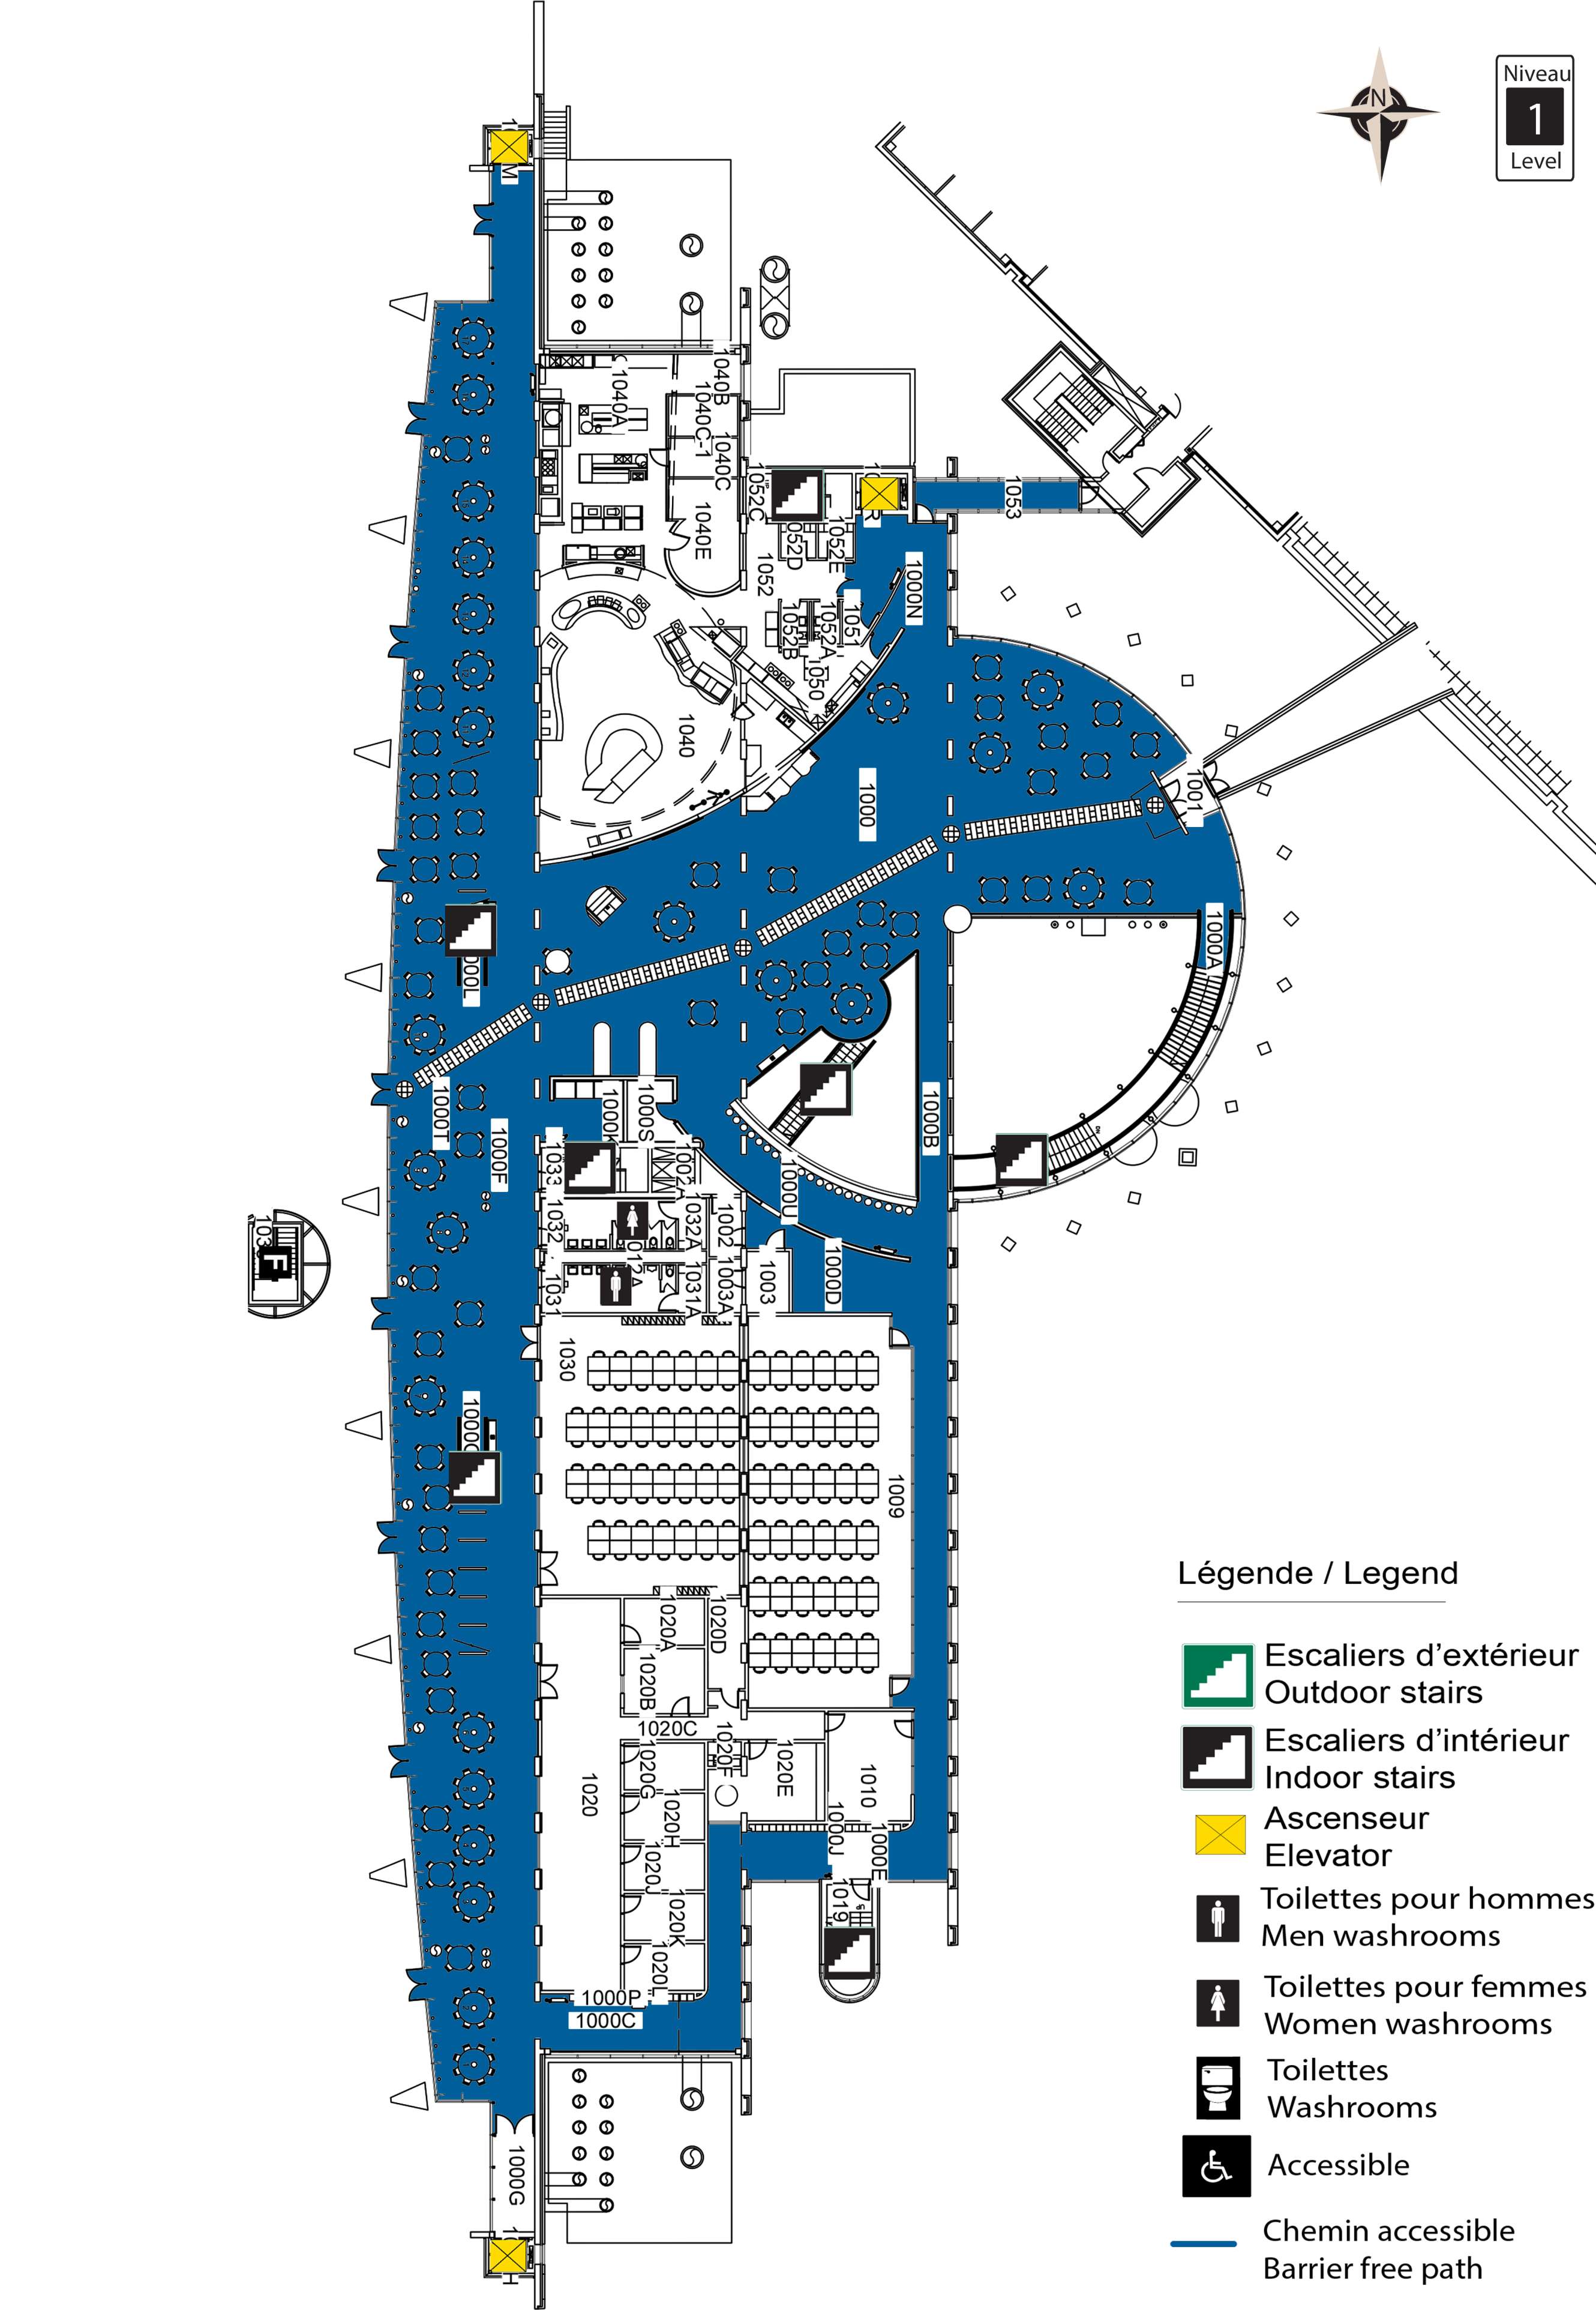 Accessible map of STE level 1